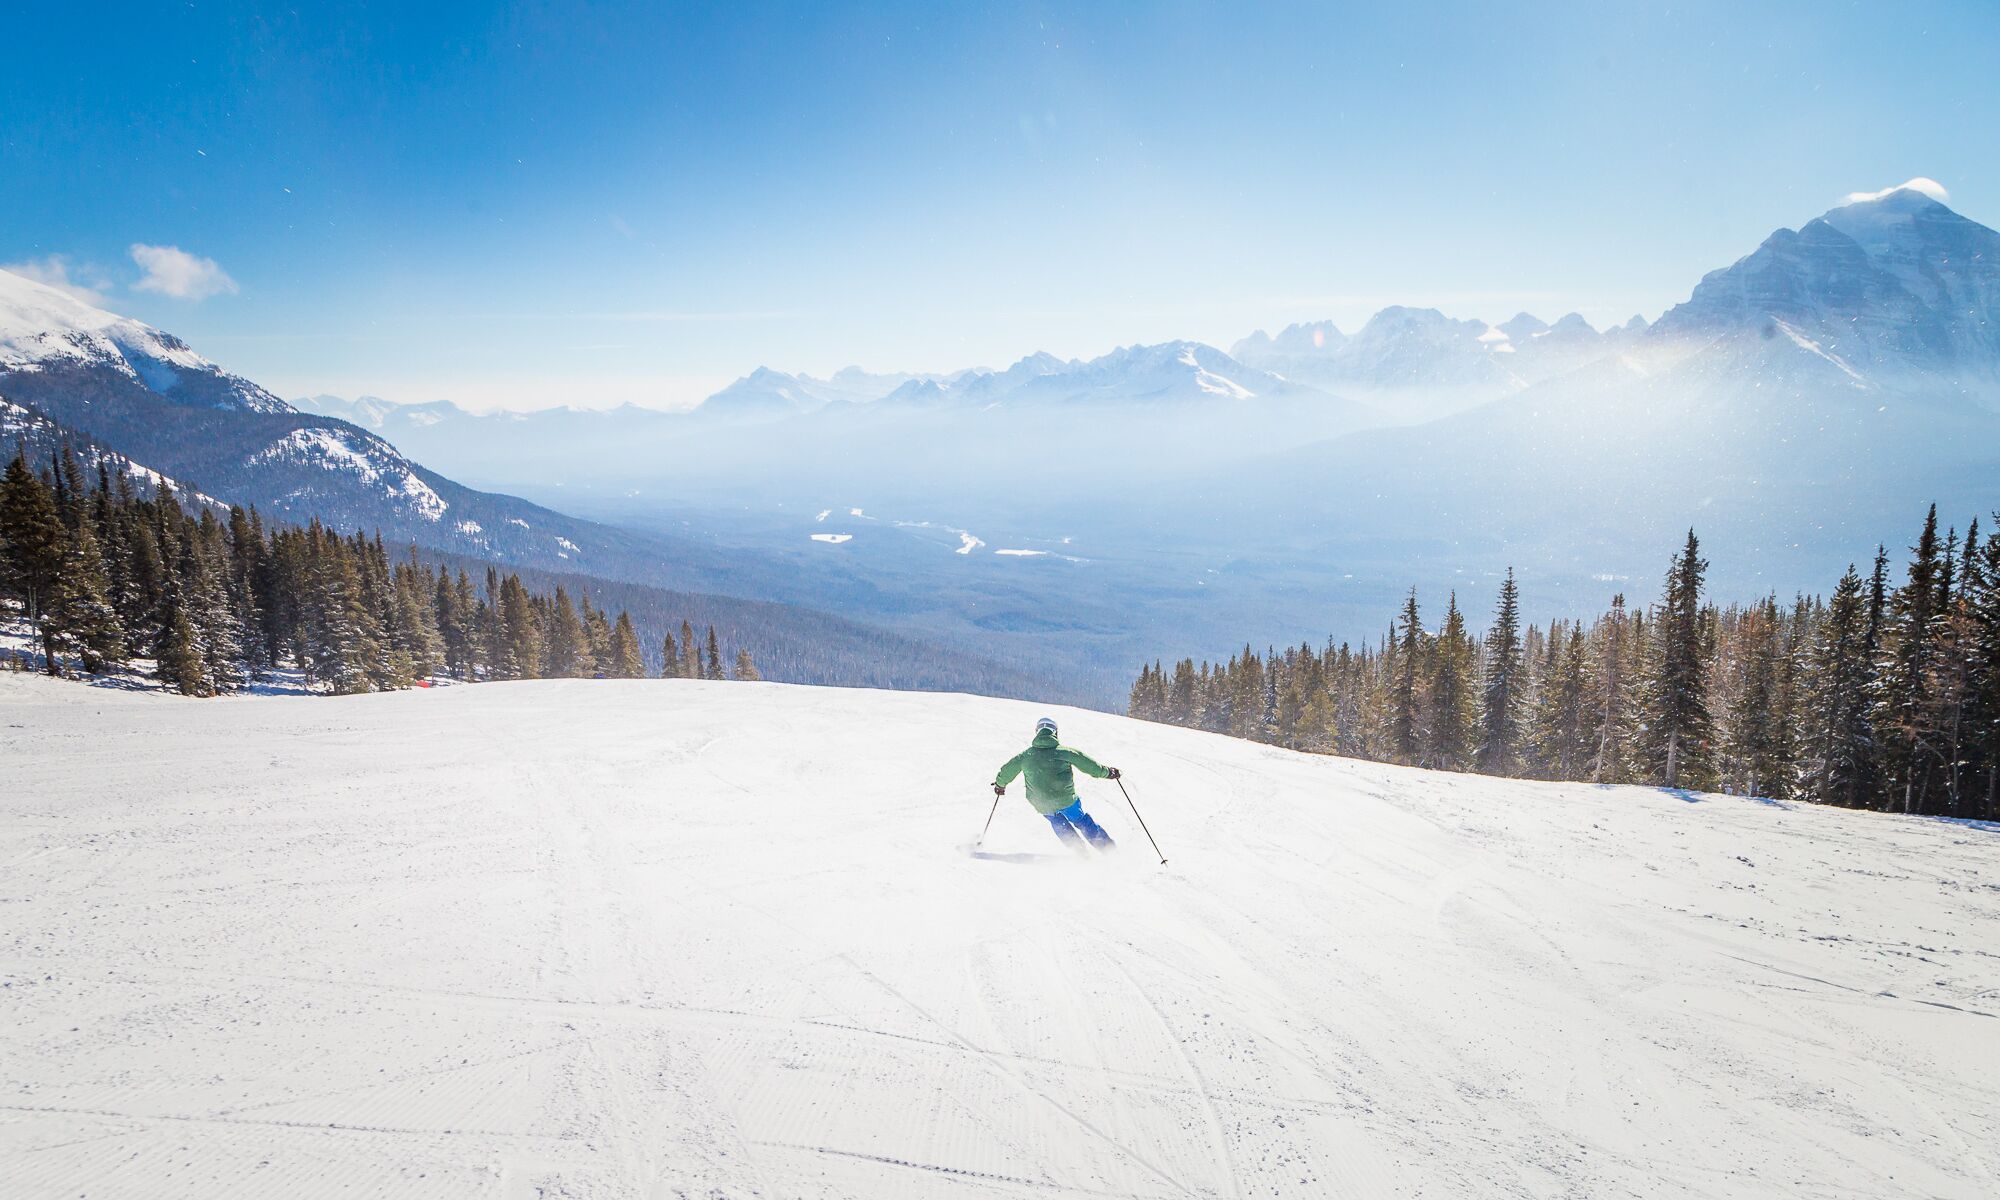 A skier goes down Charlie's Choice at the Lake Louise Ski Resort in Banff National Park.